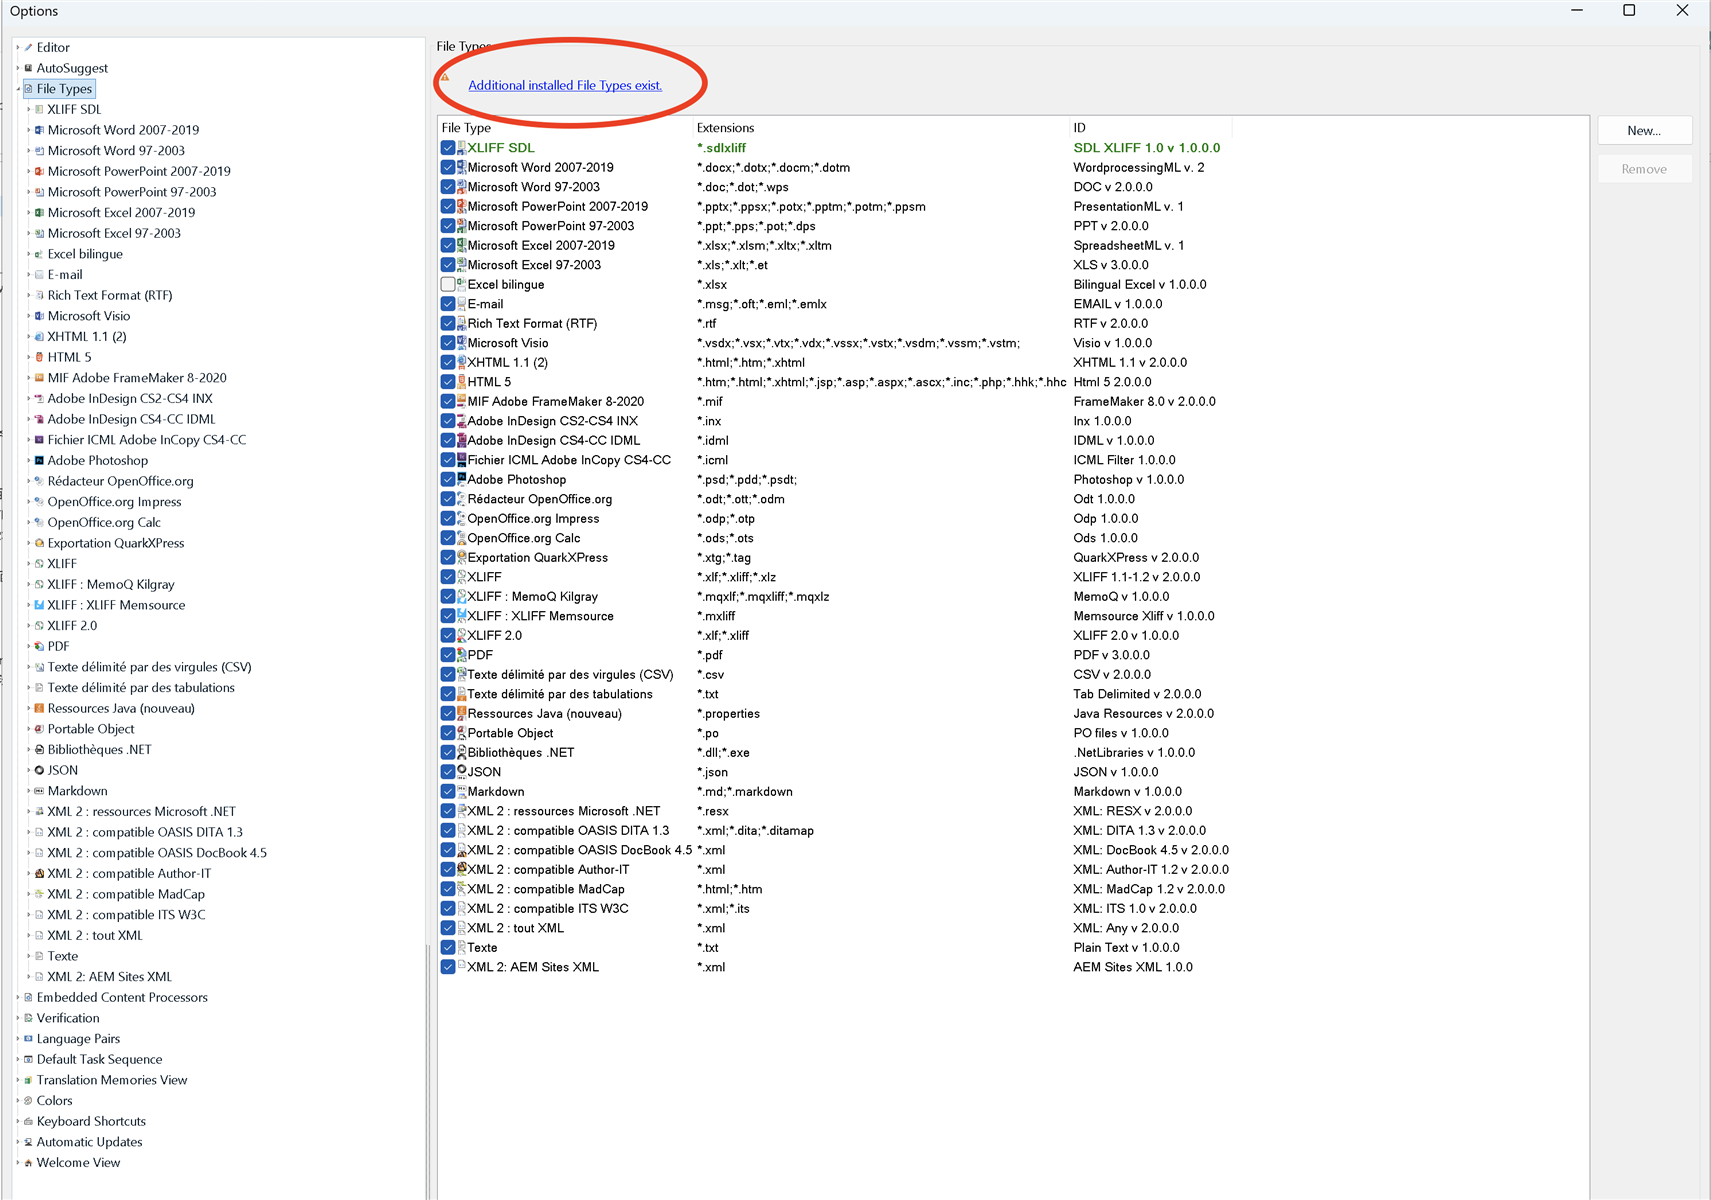 Trados Studio Options window showing File Types pane with a highlighted message 'Additional installed File Types exist.'